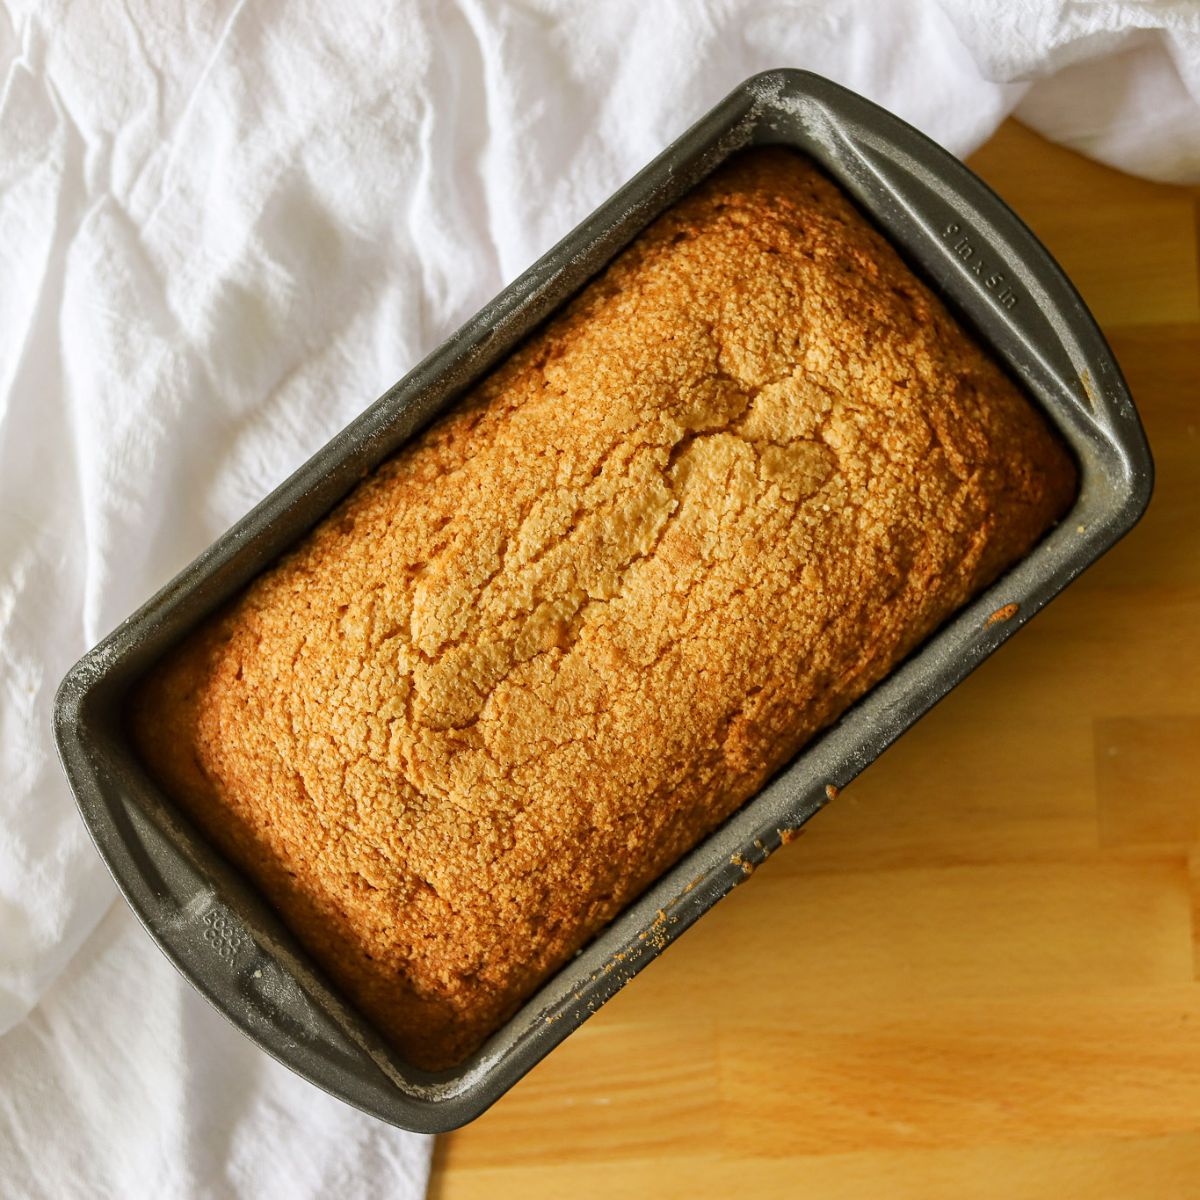 a golden brown pound cake in a loaf pan